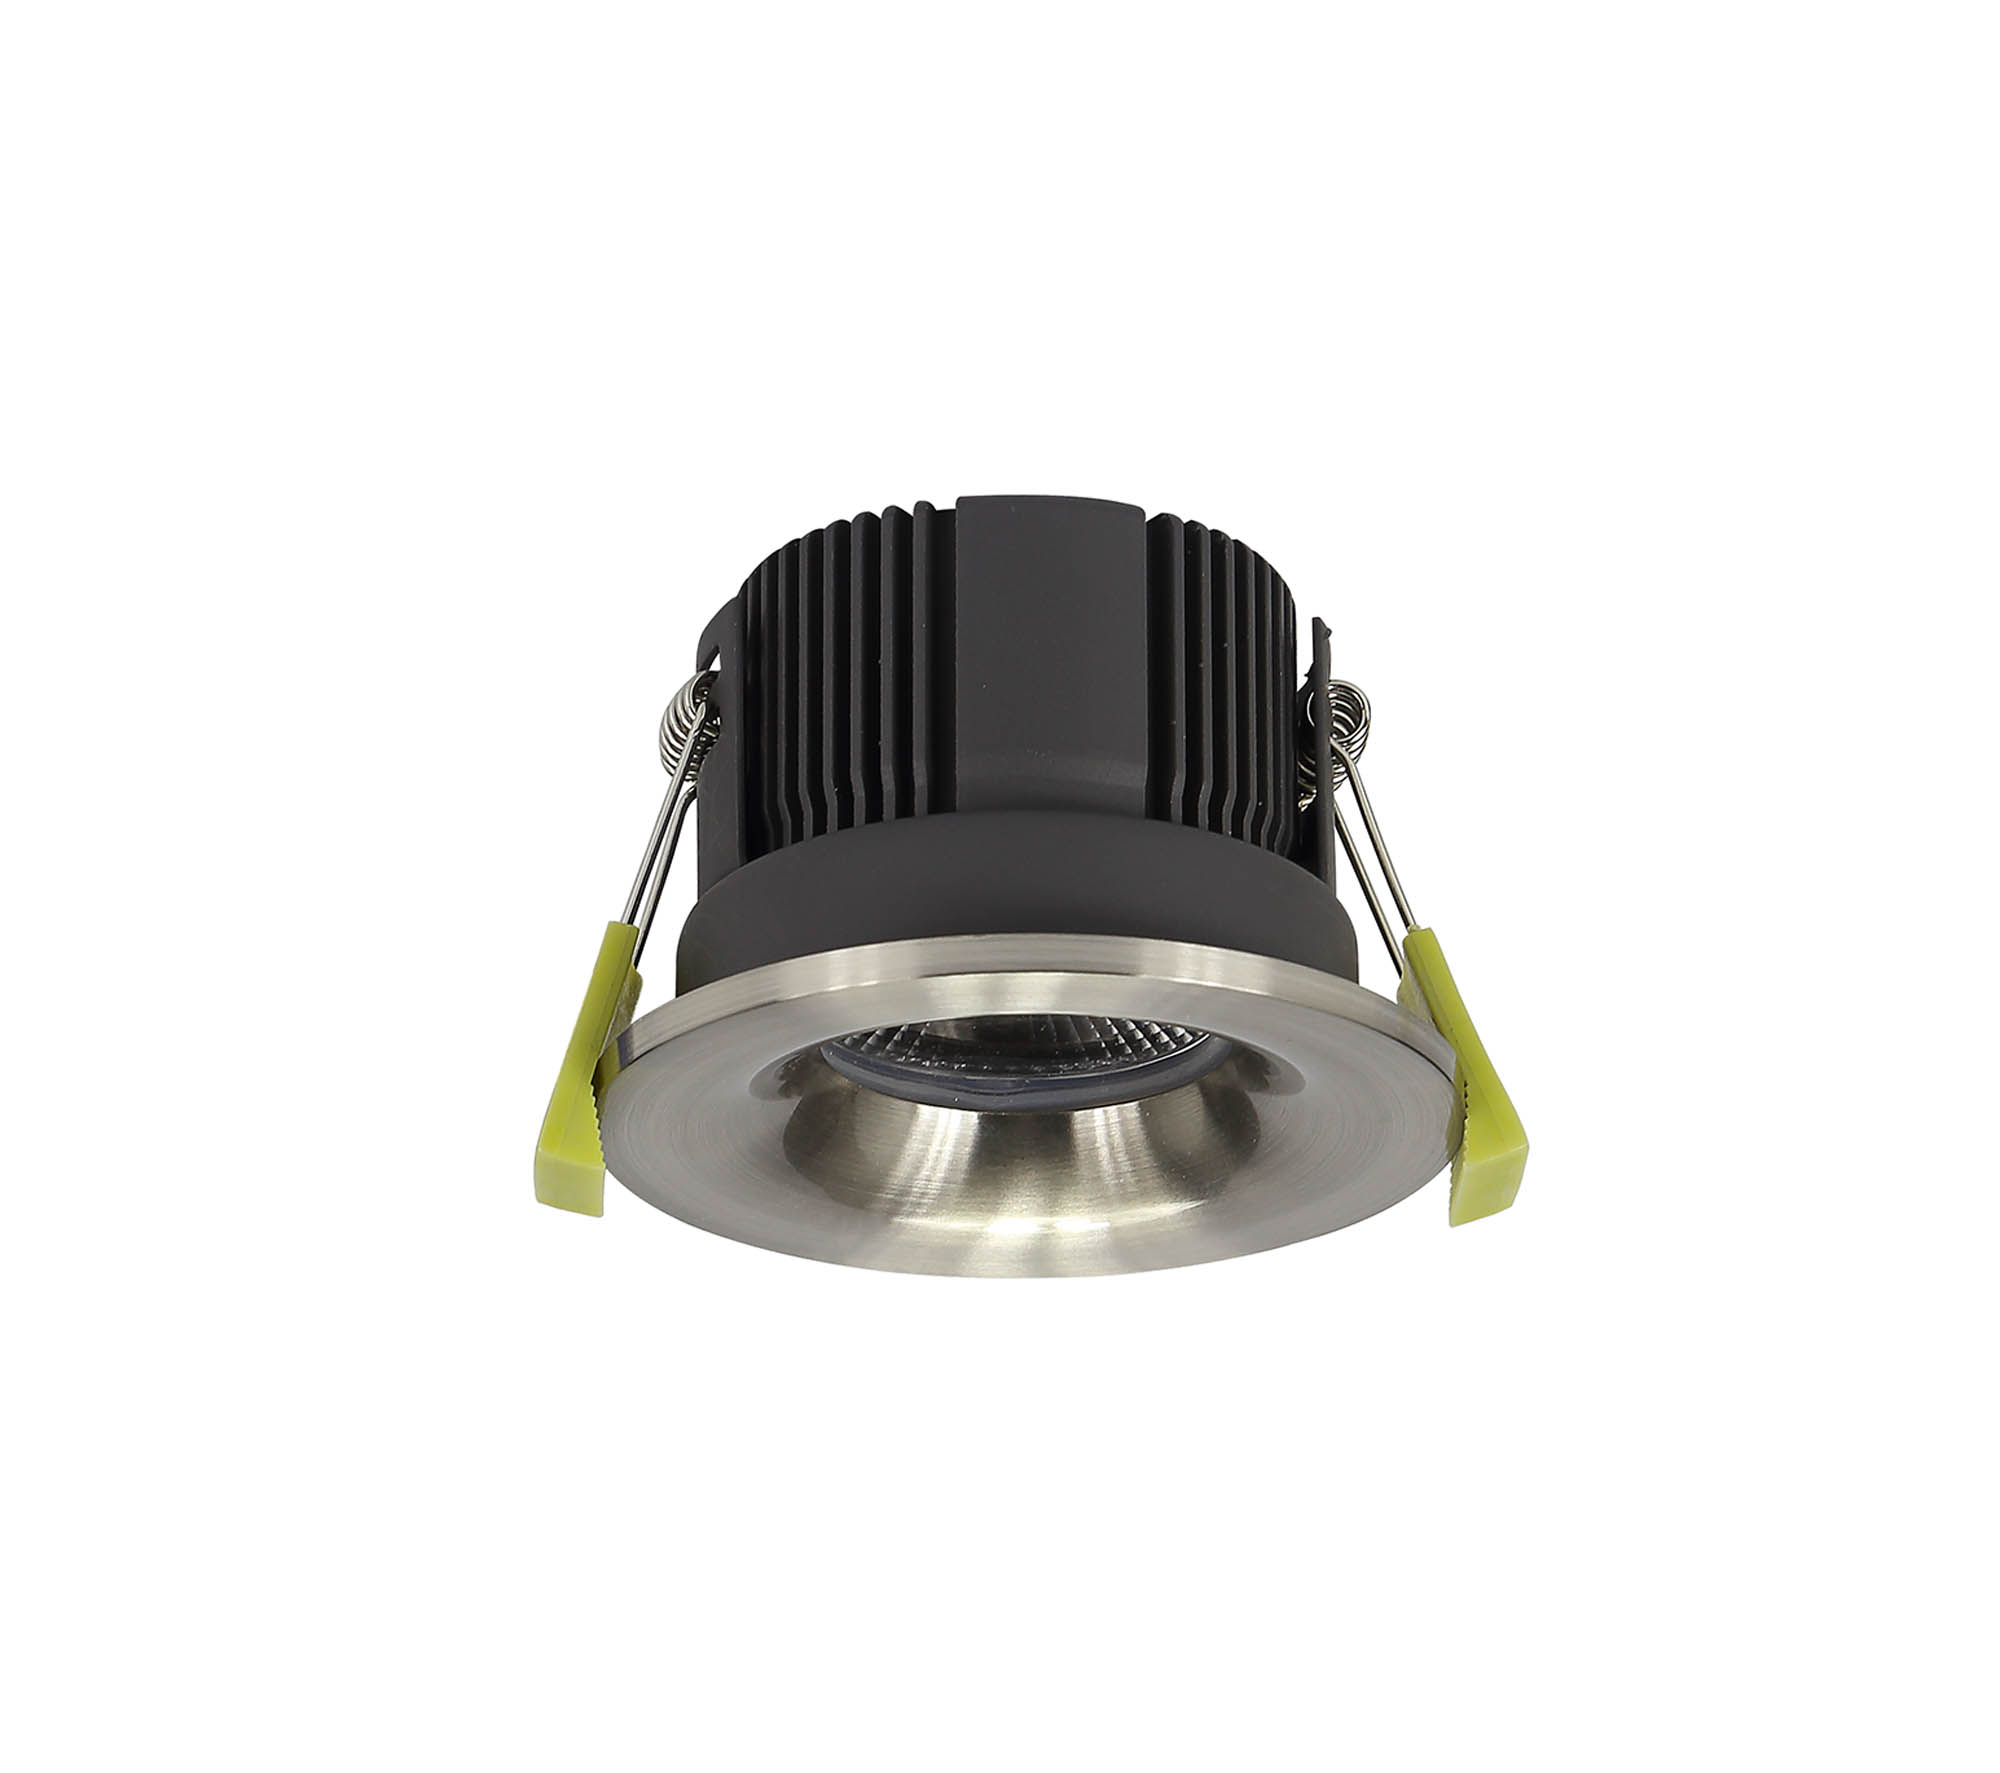 DM200692  Beck 11 FR, 11W, IP65 Satin Nickel LED Recessed Curved Fire Rated Downlight, Cut Out 68mm, 5000K, PLUG IN DRIVER INCLUDED, 3yrs Warranty